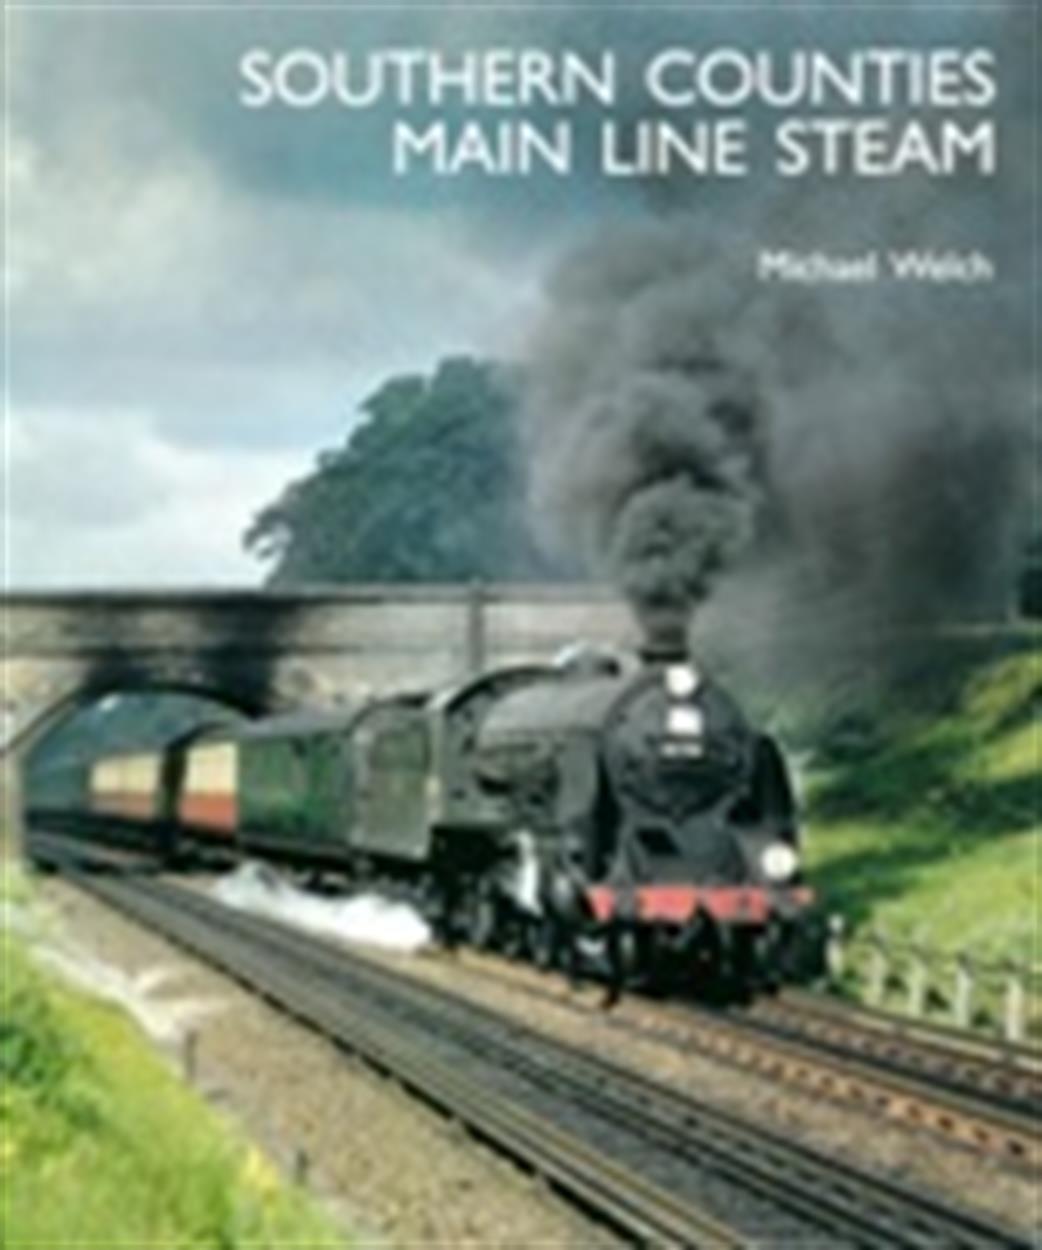 Capital Transport Publishing  9781854143495 Southern Counties Main Line Steam by Michael Welch